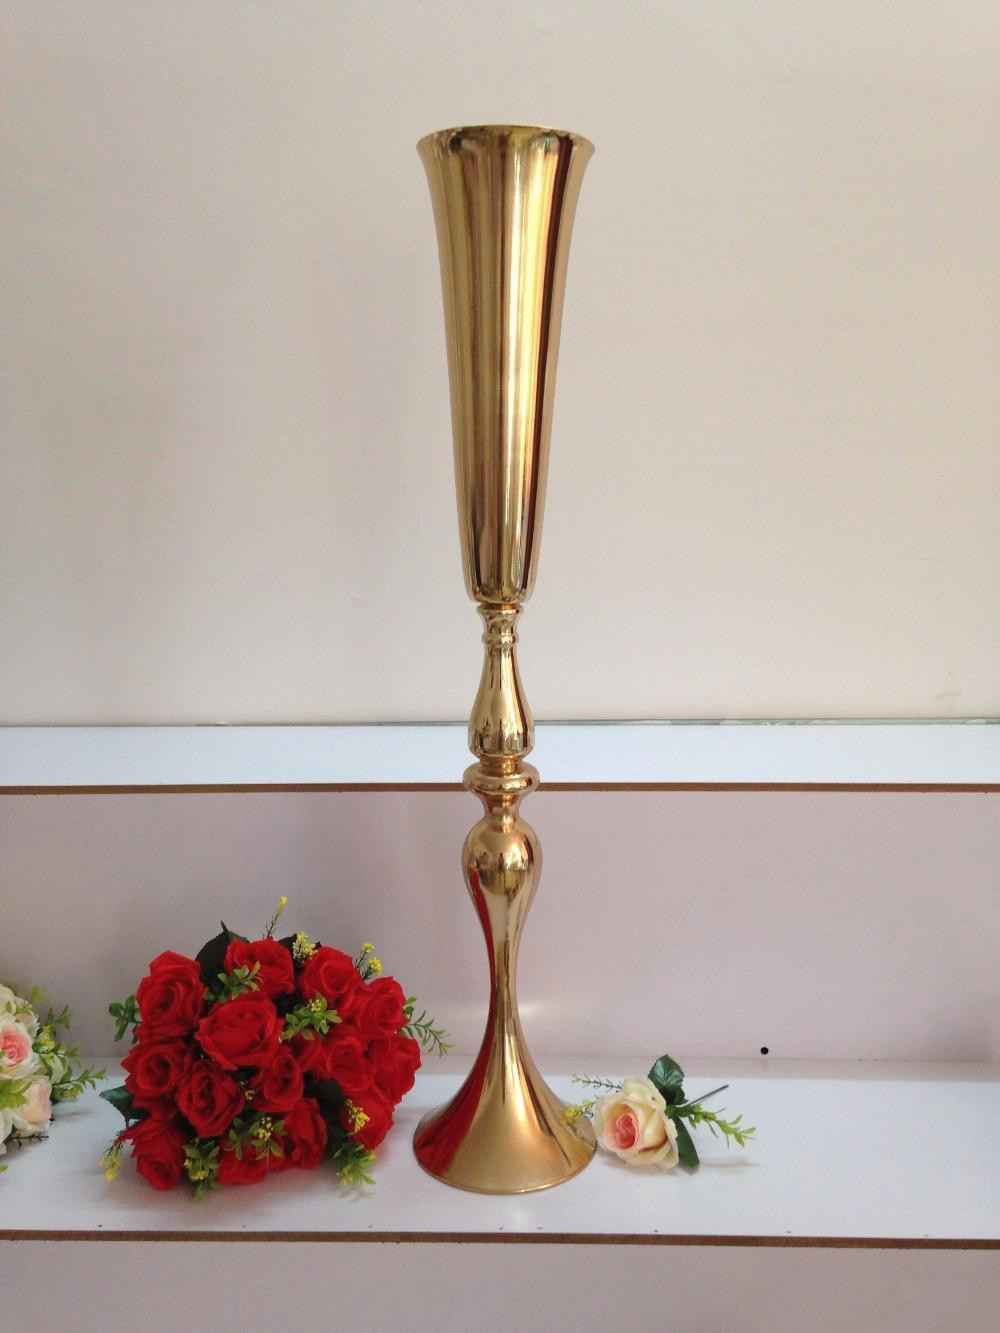 13 Best Gold Round Flower Vase 2024 free download gold round flower vase of faux crystal candle holders alive vases gold tall jpgi 0d cheap in with regard to faux crystal candle holders alive vases gold tall jpgi 0d cheap in crystal candle 